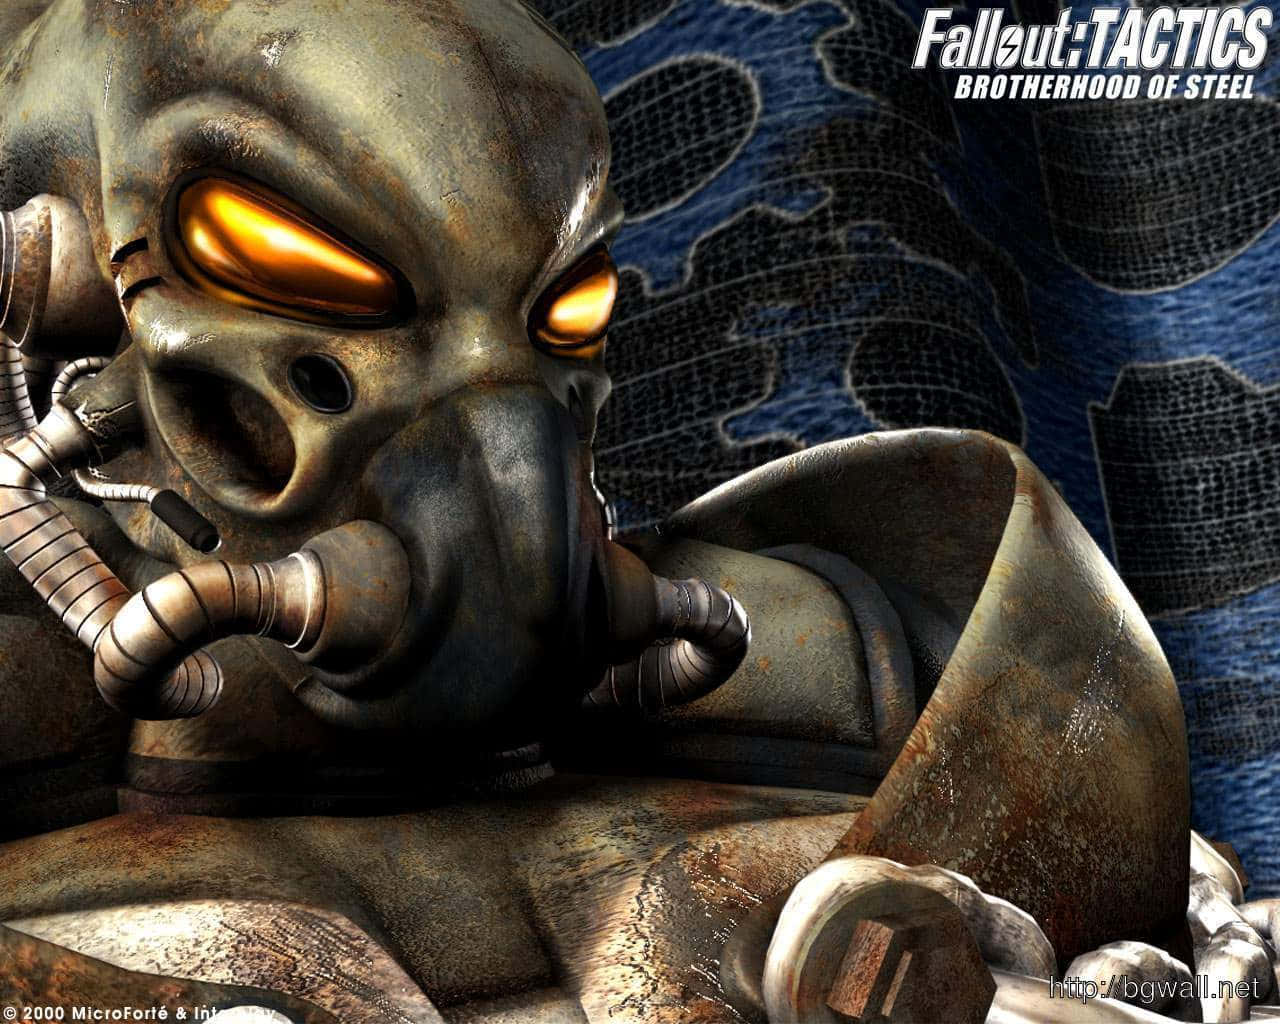 Fallout Brotherhood of Steel Power Armored Soldier Wallpaper